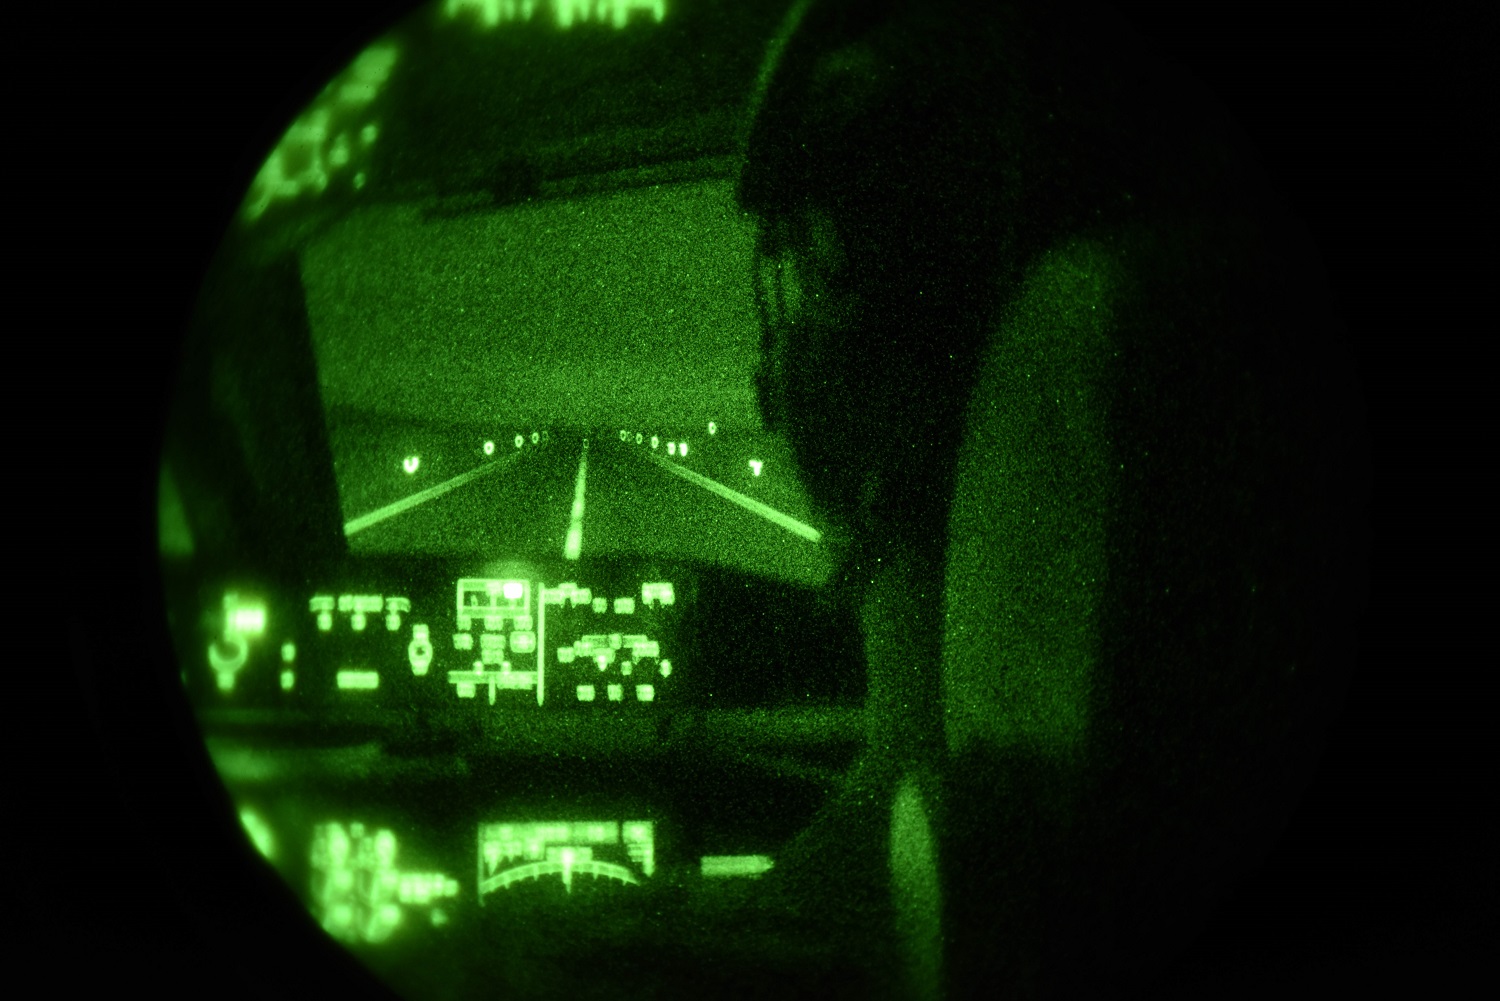 US Air Force Tests KC-46 Pegasus for Night Vision Goggles-Compatibility